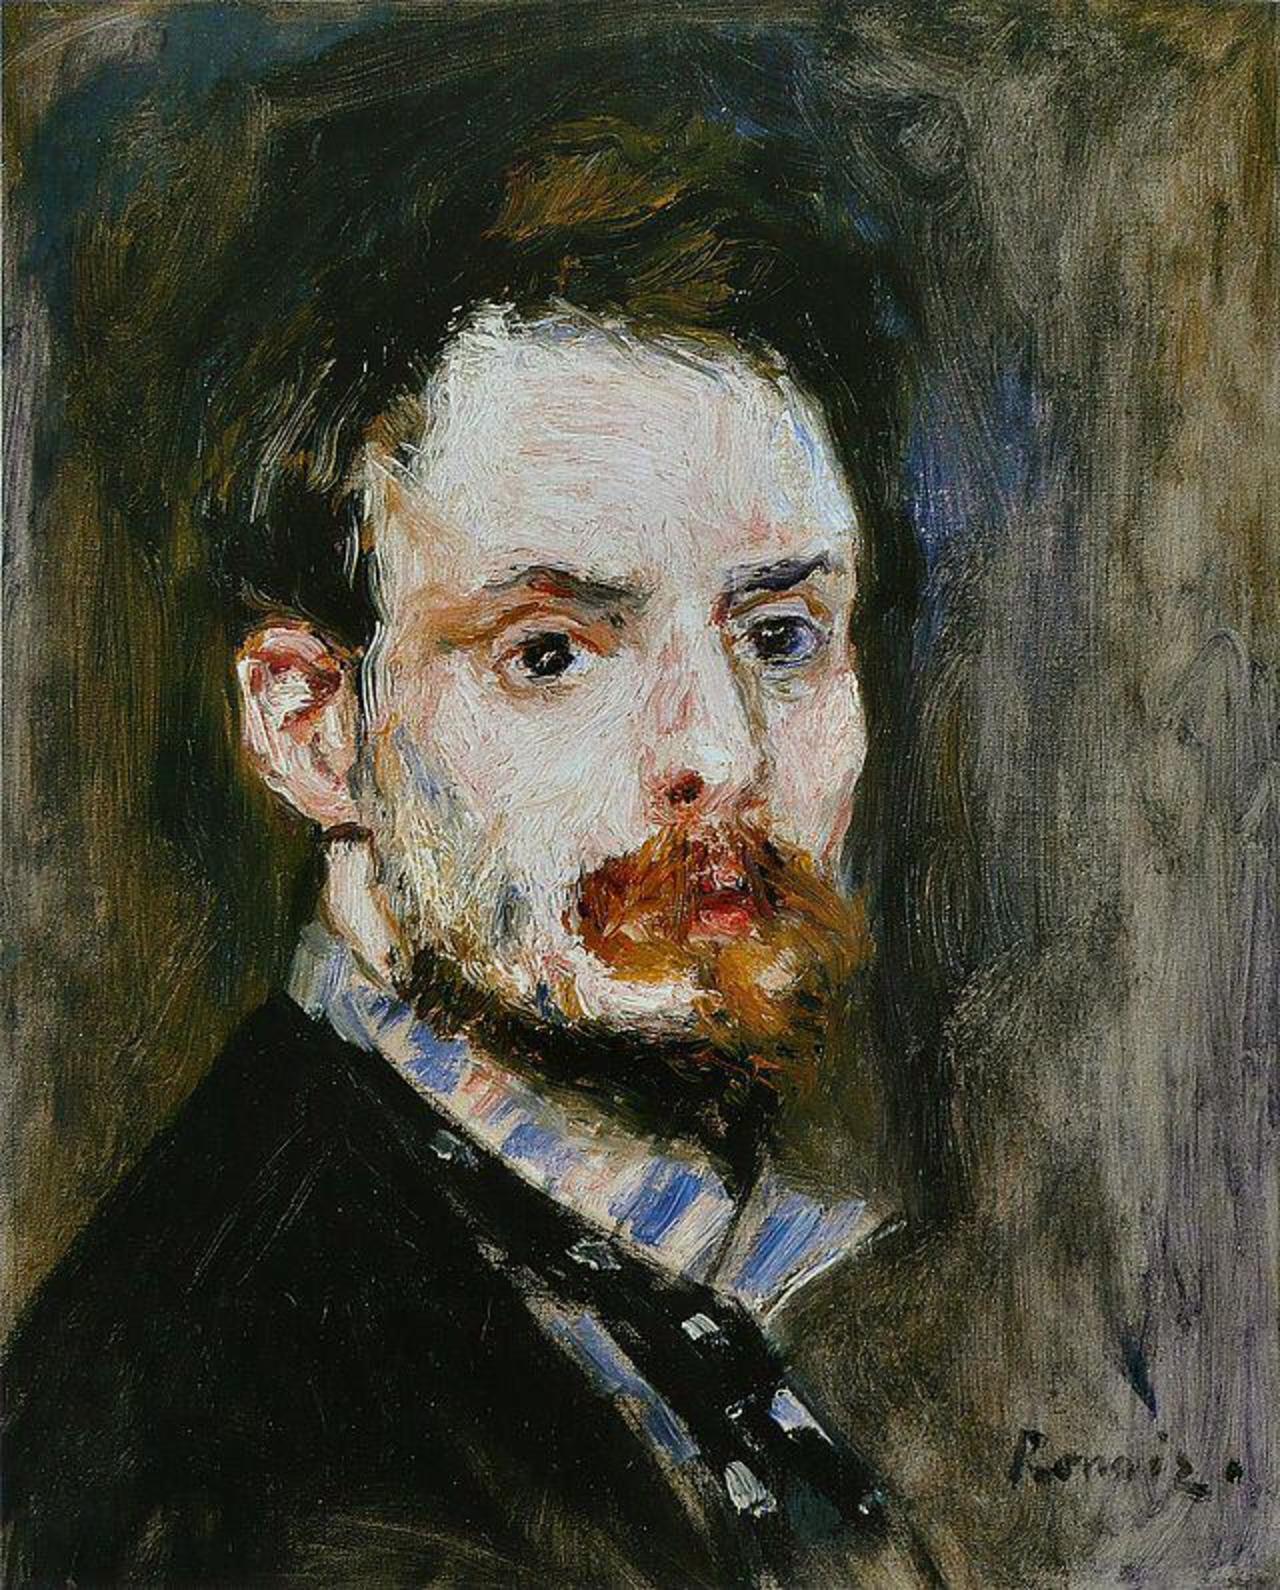 Today is the birthday of the French artist Pierre-Auguste Renoir.
Self-portrait, 1875. #impressionism #art @the_clark http://t.co/FogFH68Wq2